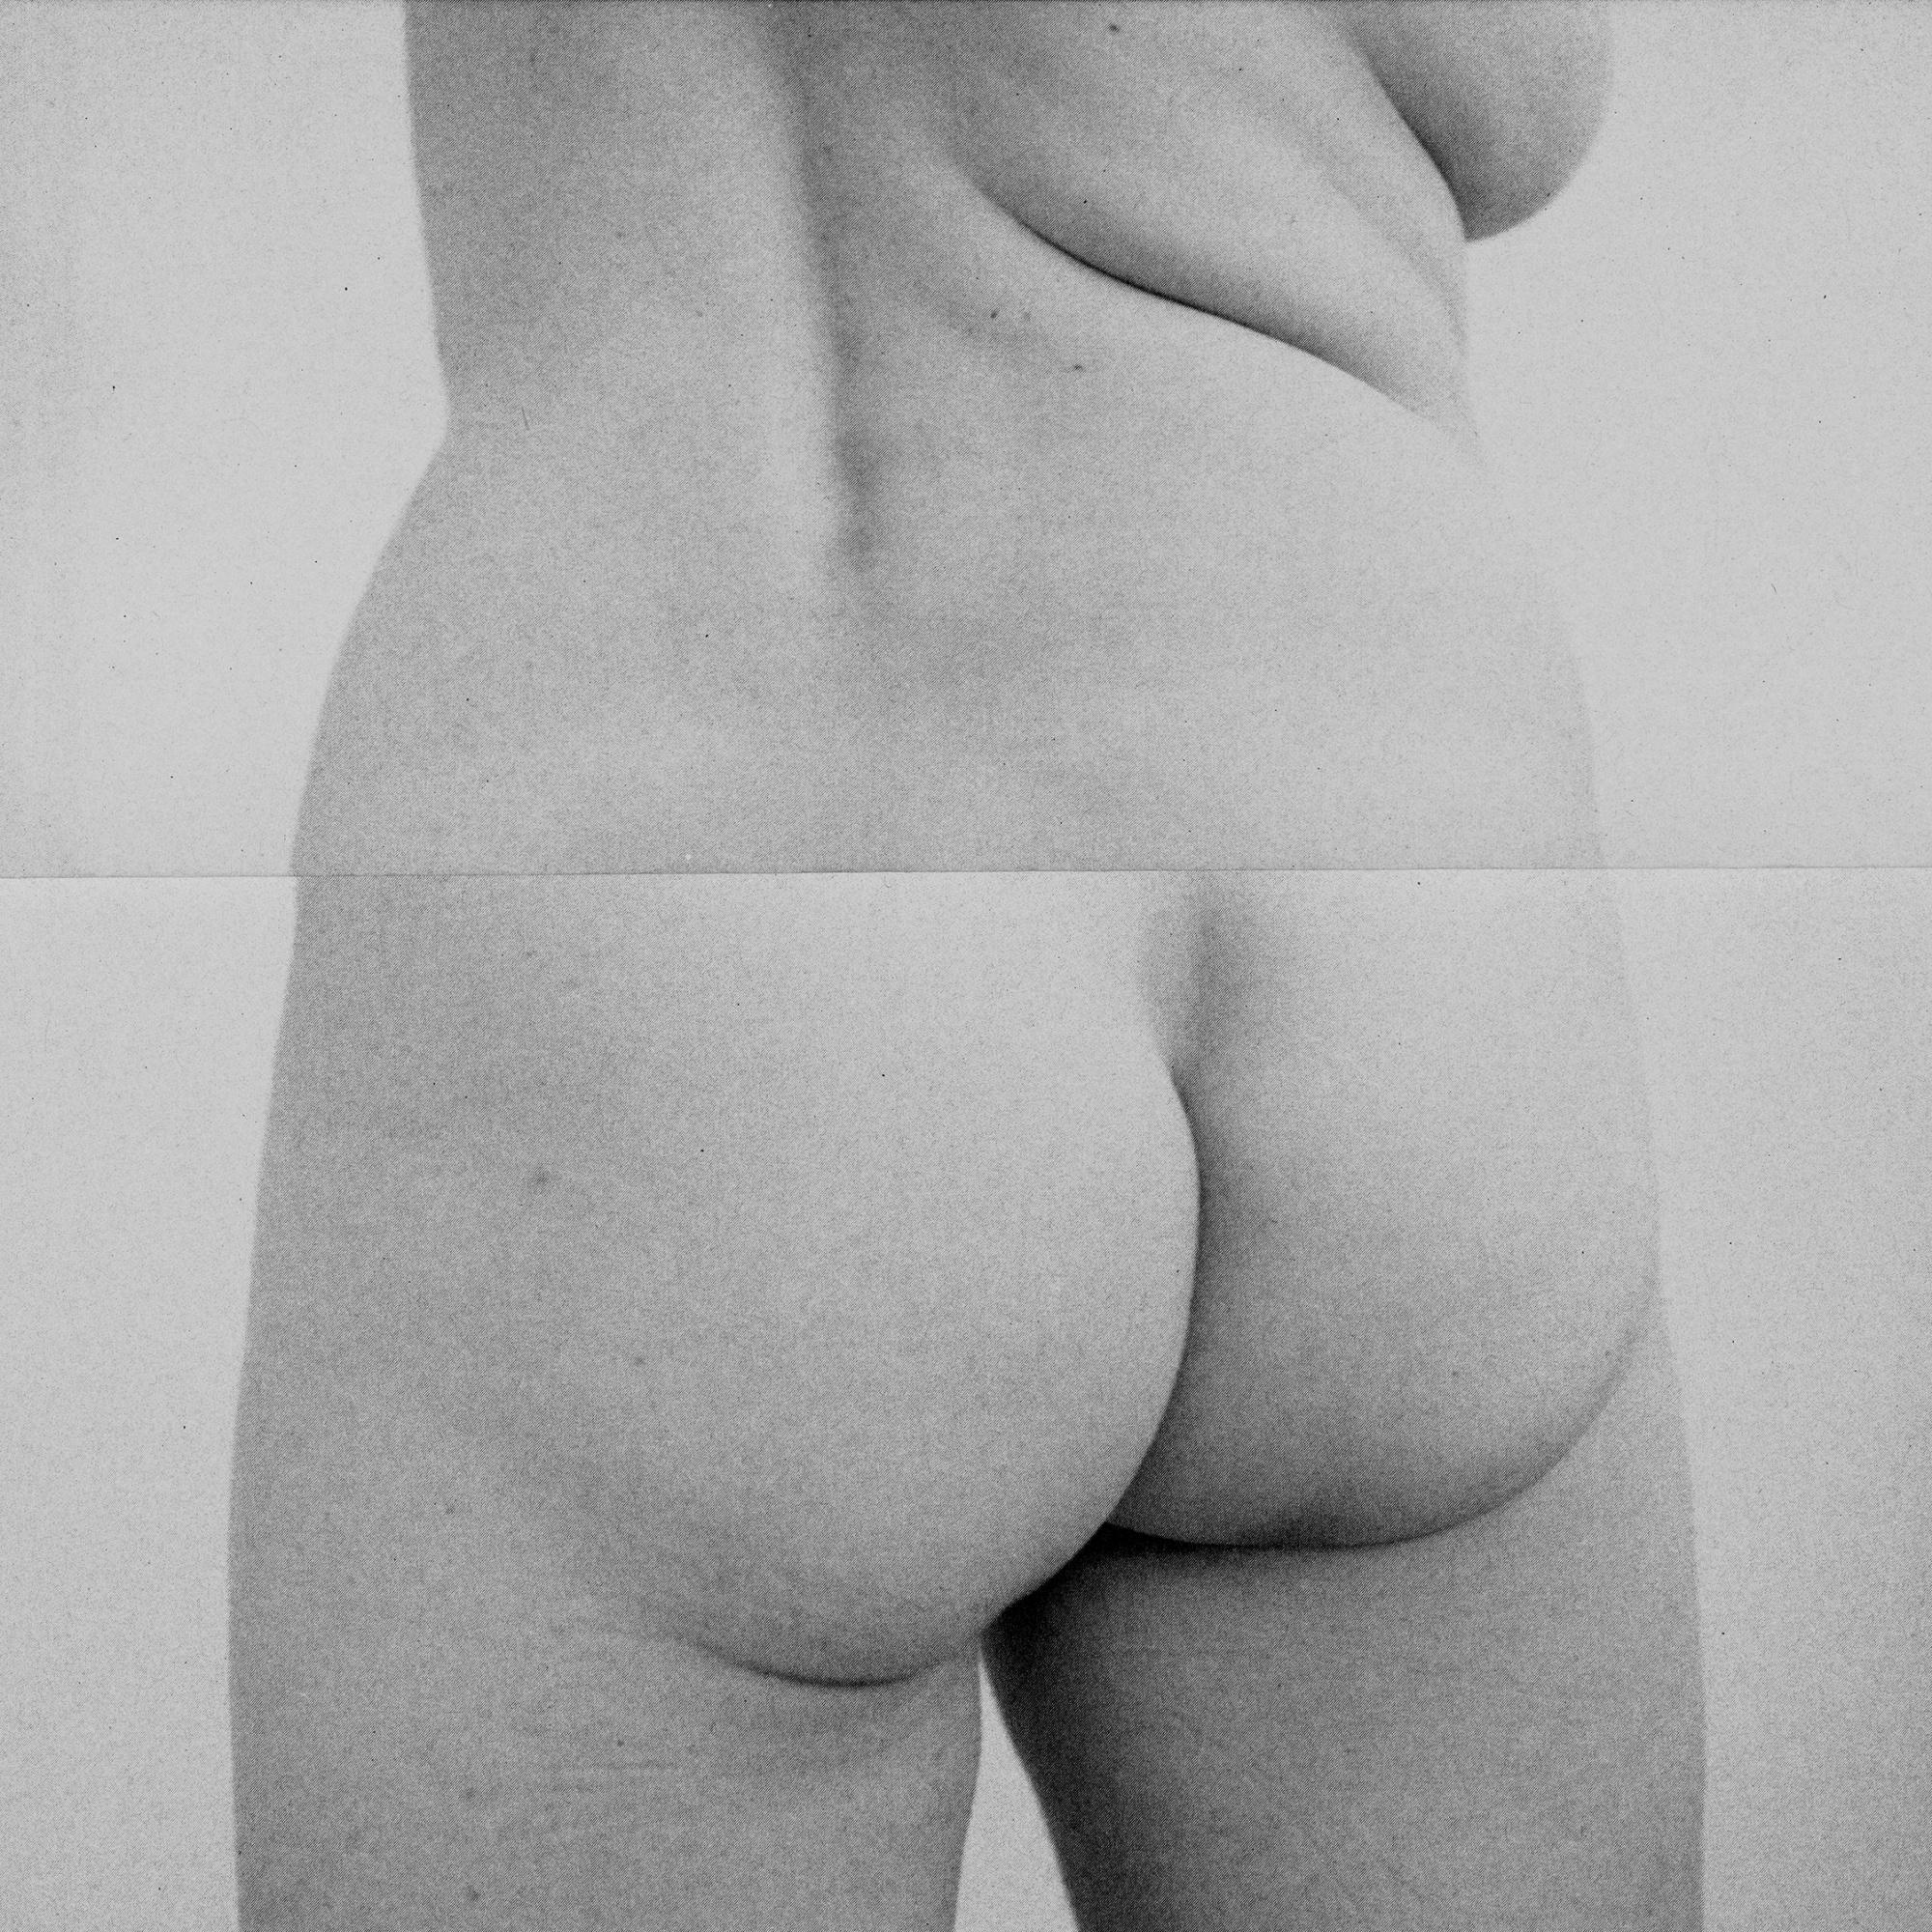 BRIGITTE LUSTENBERGER (*1969, Switzerland)
Not titled yet, from the series 'A Gaze of One's Own‘
2021
Silver gelatin print on Baryta paper
Sheet 70 x 70 cm (27 1/2 x 27 1/2 in.)
Frame 81,2 x 80,7 x 3,5 cm (32 x 31 3/4 x 1 3/8 in.)
Edition of 5, plus